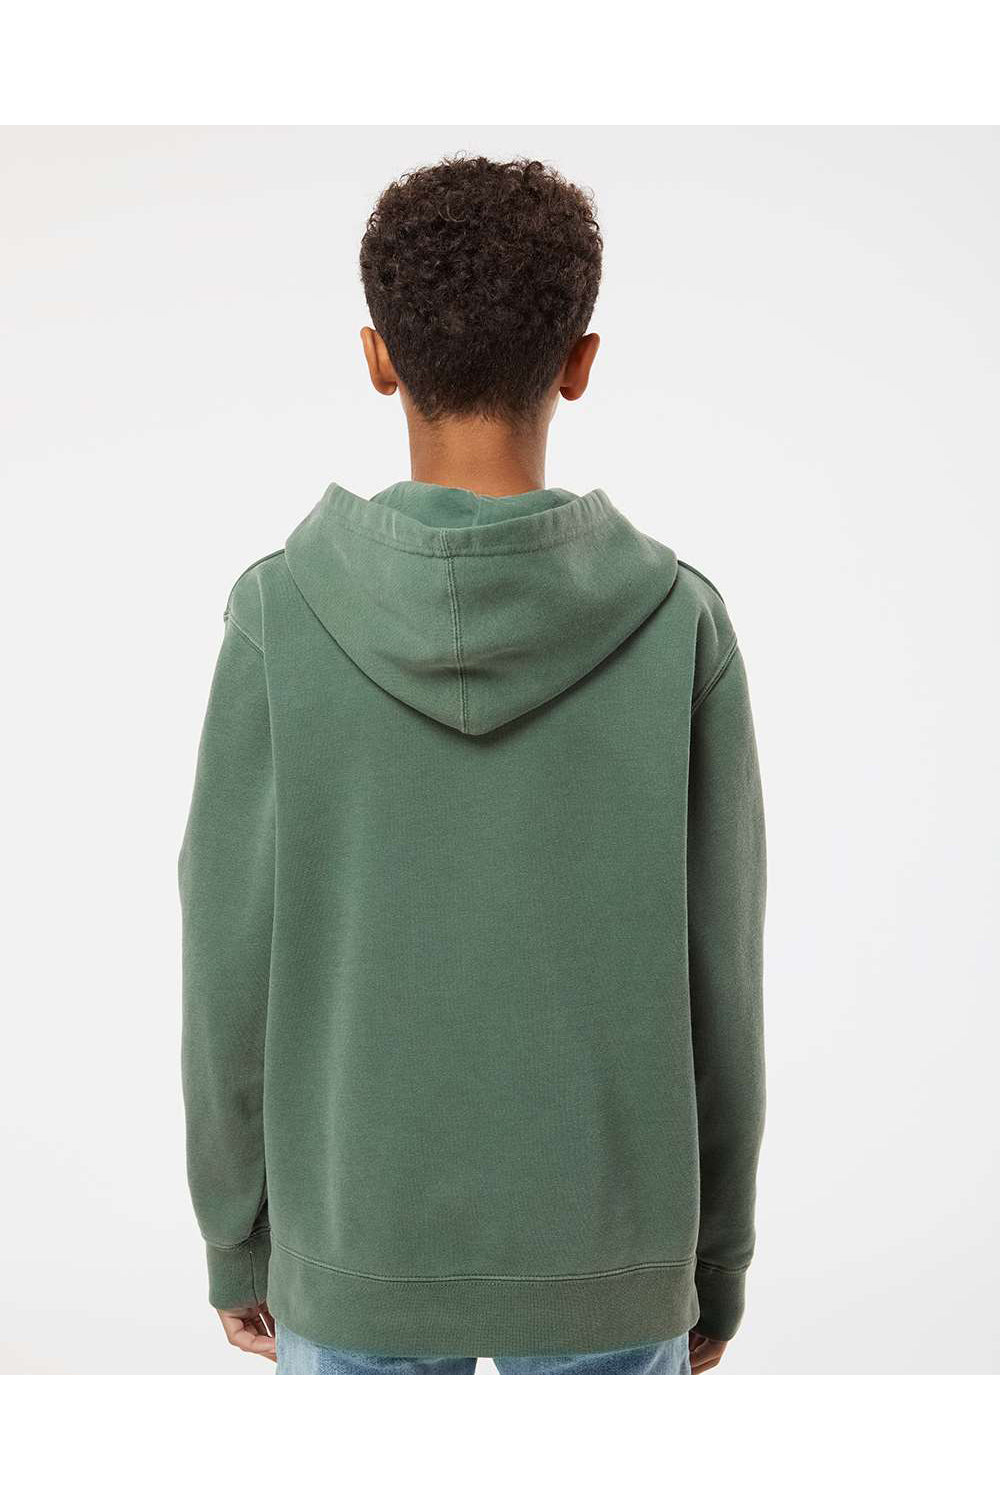 Independent Trading Co. PRM1500Y Youth Pigment Dyed Hooded Sweatshirt Hoodie Alpine Green Model Back